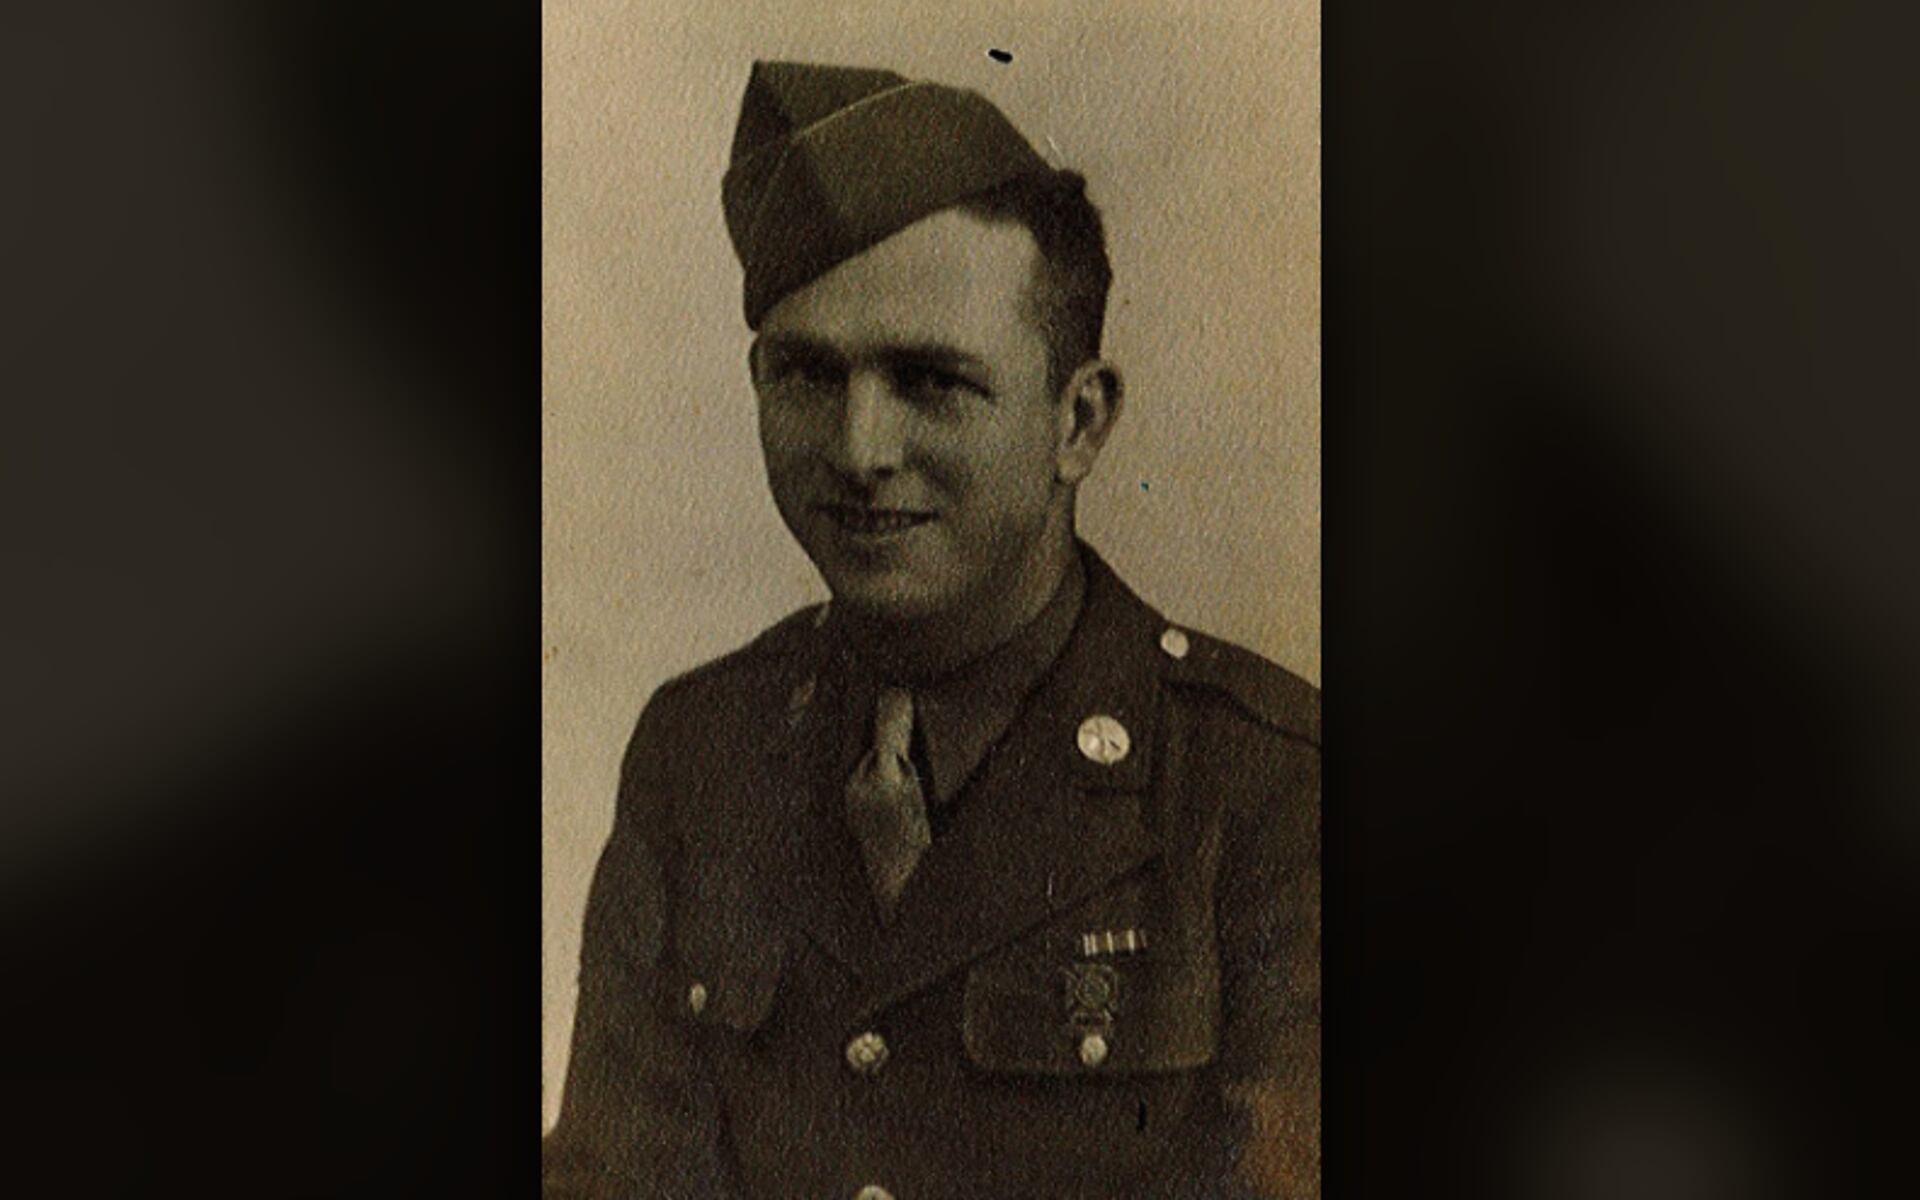 Remains of WWII soldier identified as North Carolina man